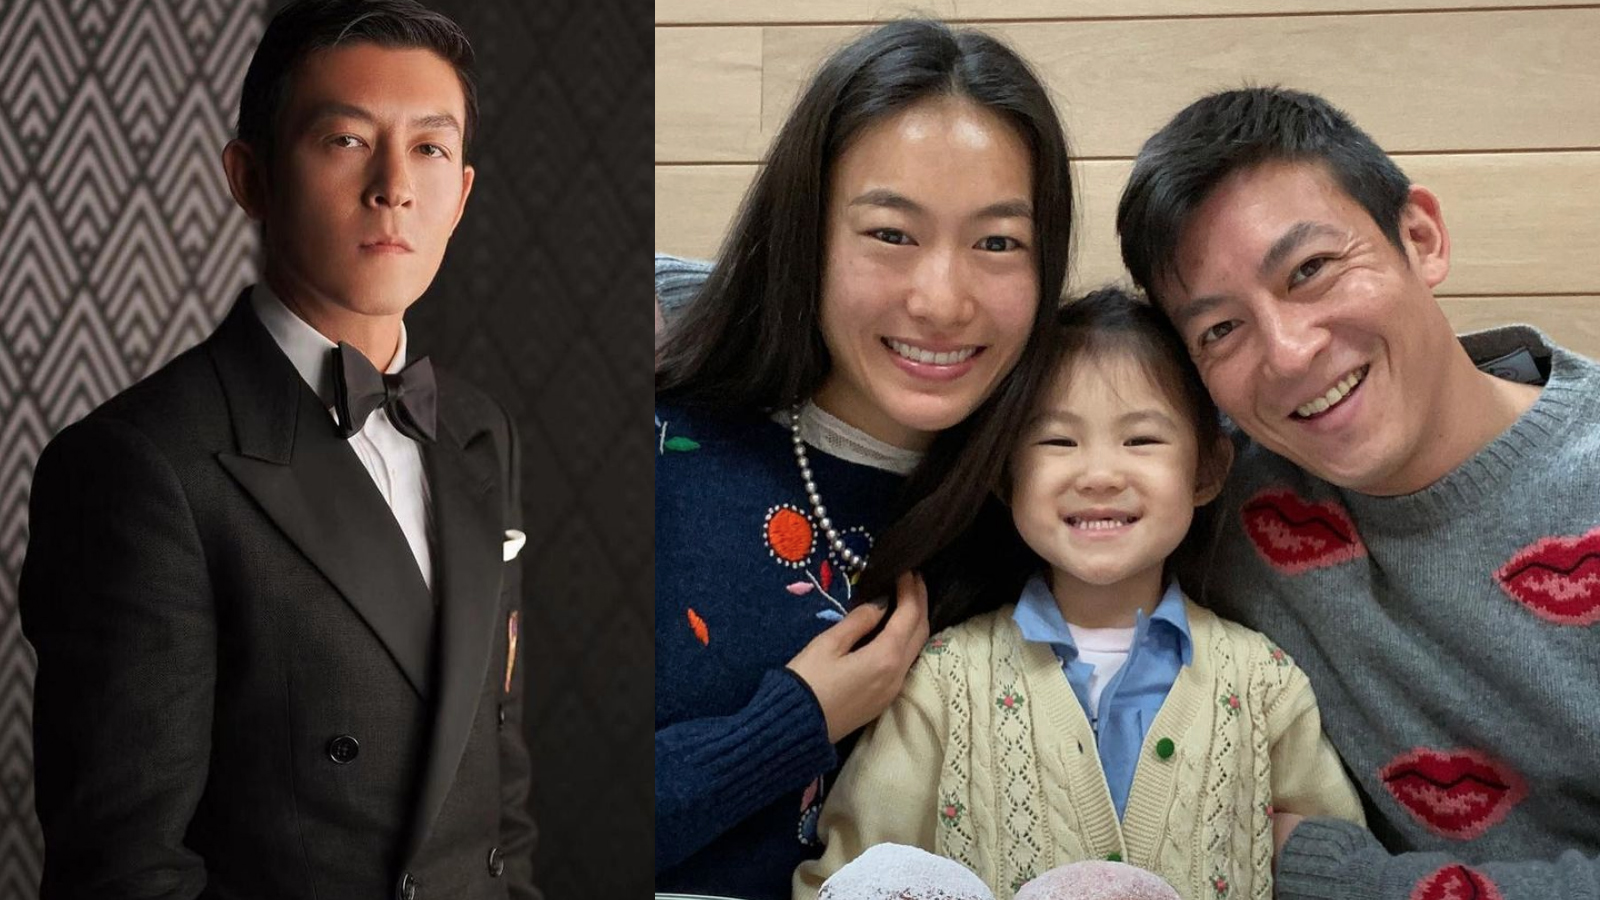 Edison Chen Uses A S$198K Louis Vuitton x Supreme Trunk As His 3-Year-Old  Daughter's Toy Box - TODAY